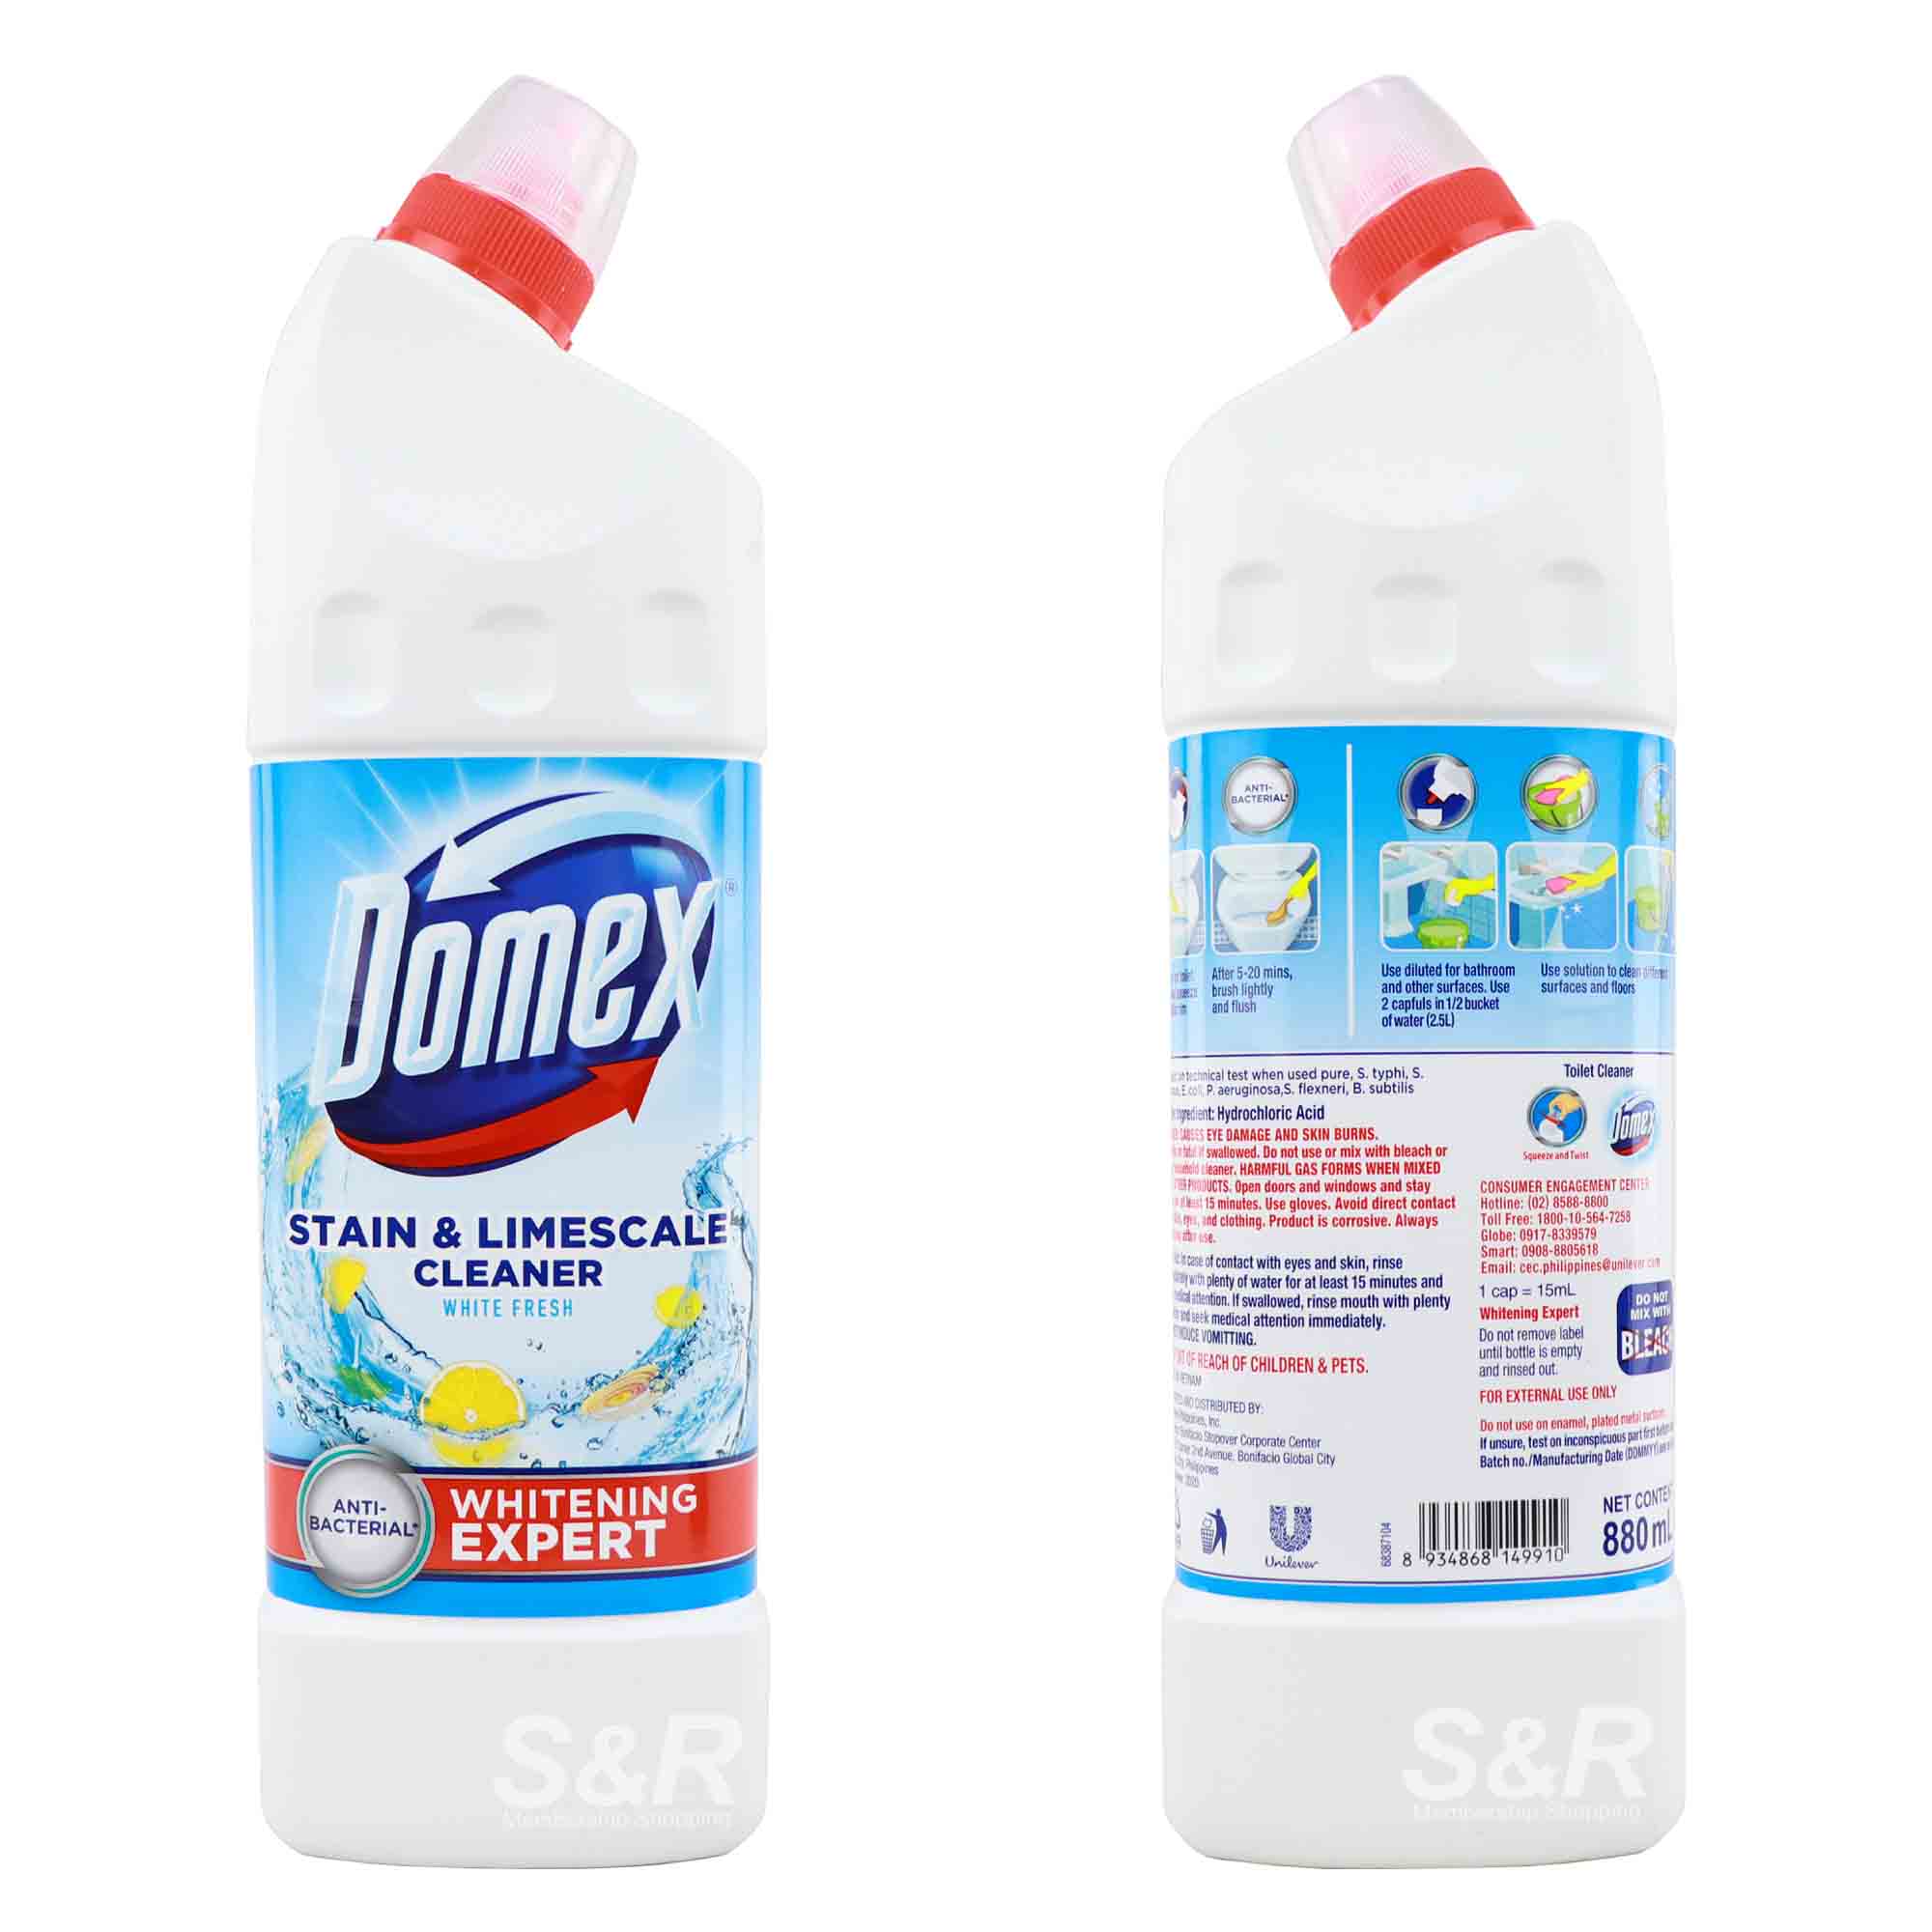 Stain and Limescale Cleaner